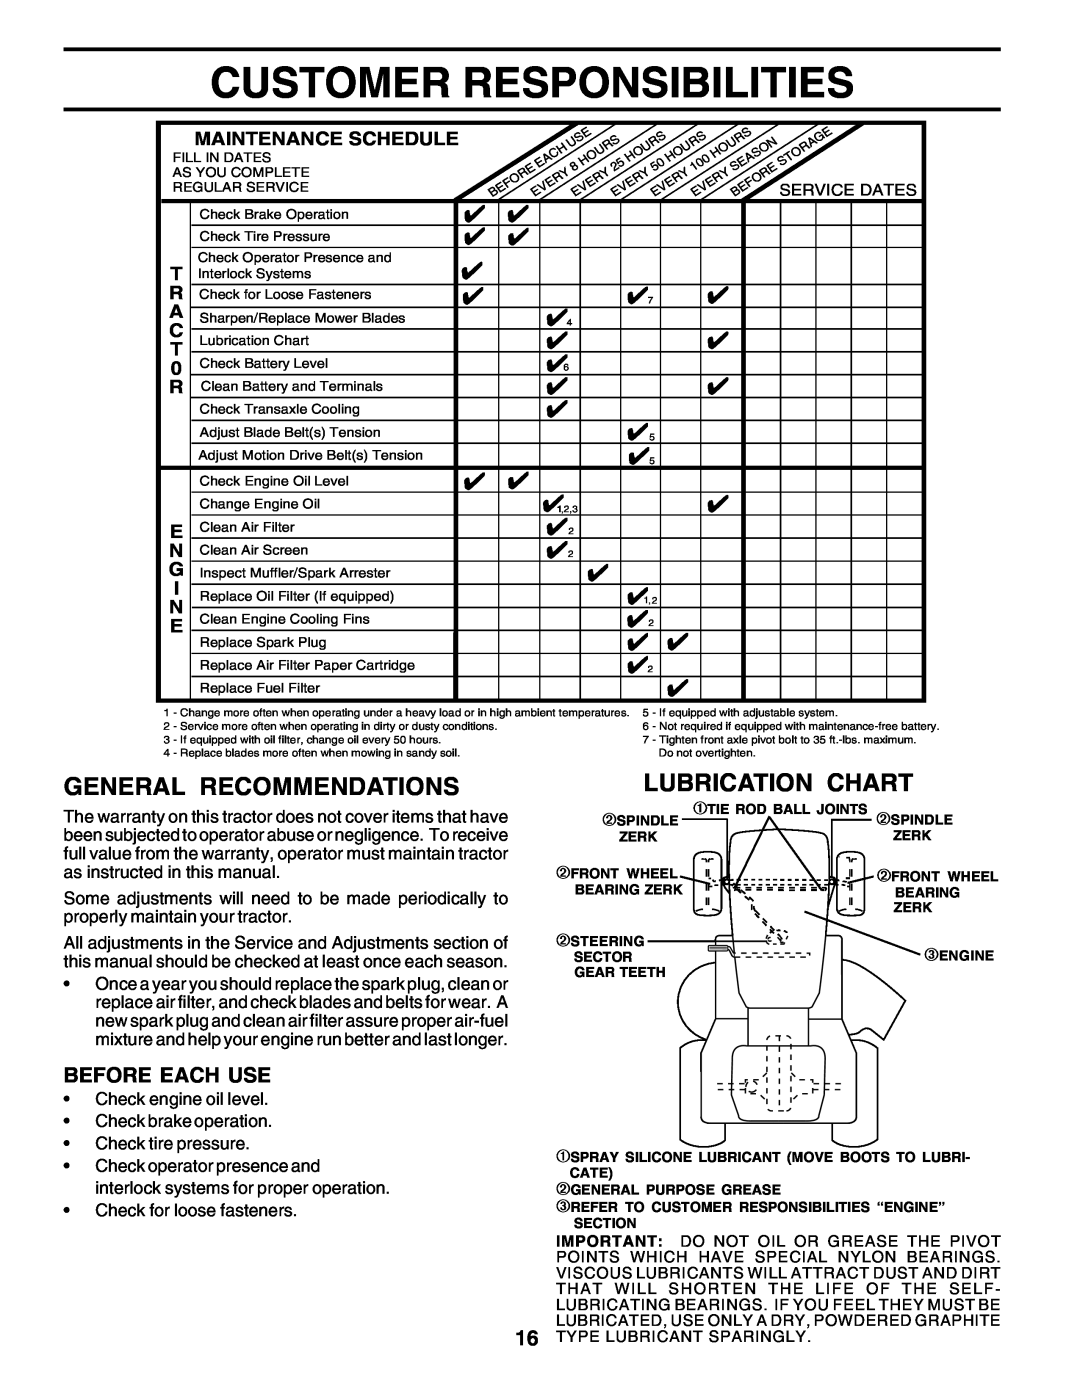 Poulan PRGT22H50C owner manual Customer Responsibilities, General Recommendations, Lubrication Chart ¡, Before Each Use 